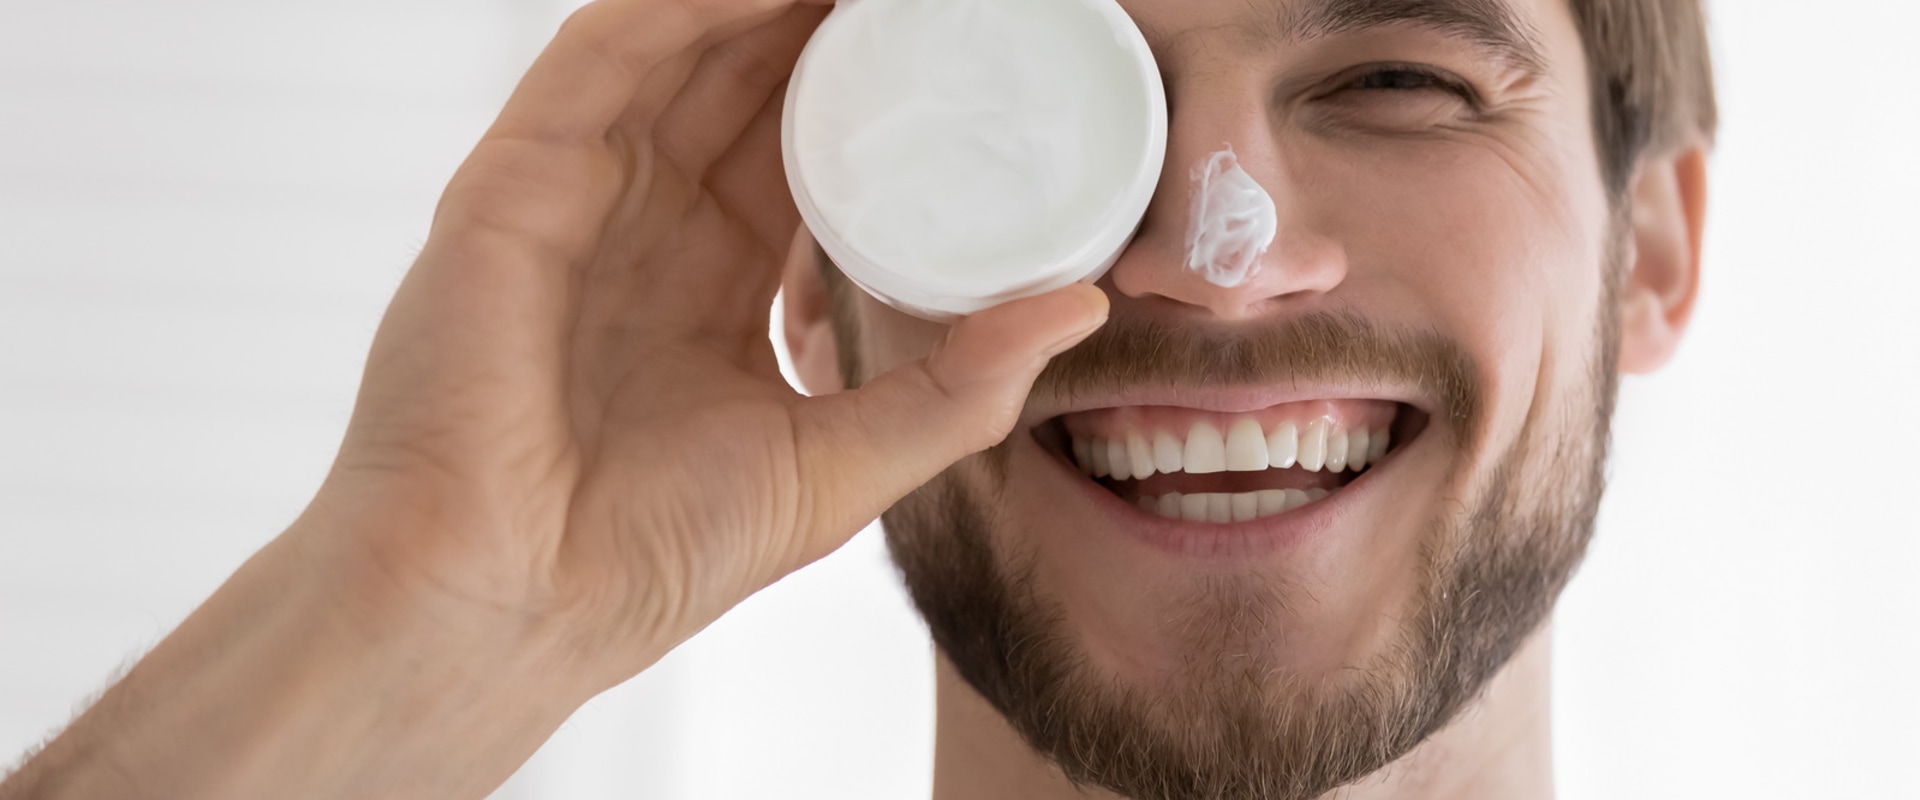 Do men have different skincare needs?